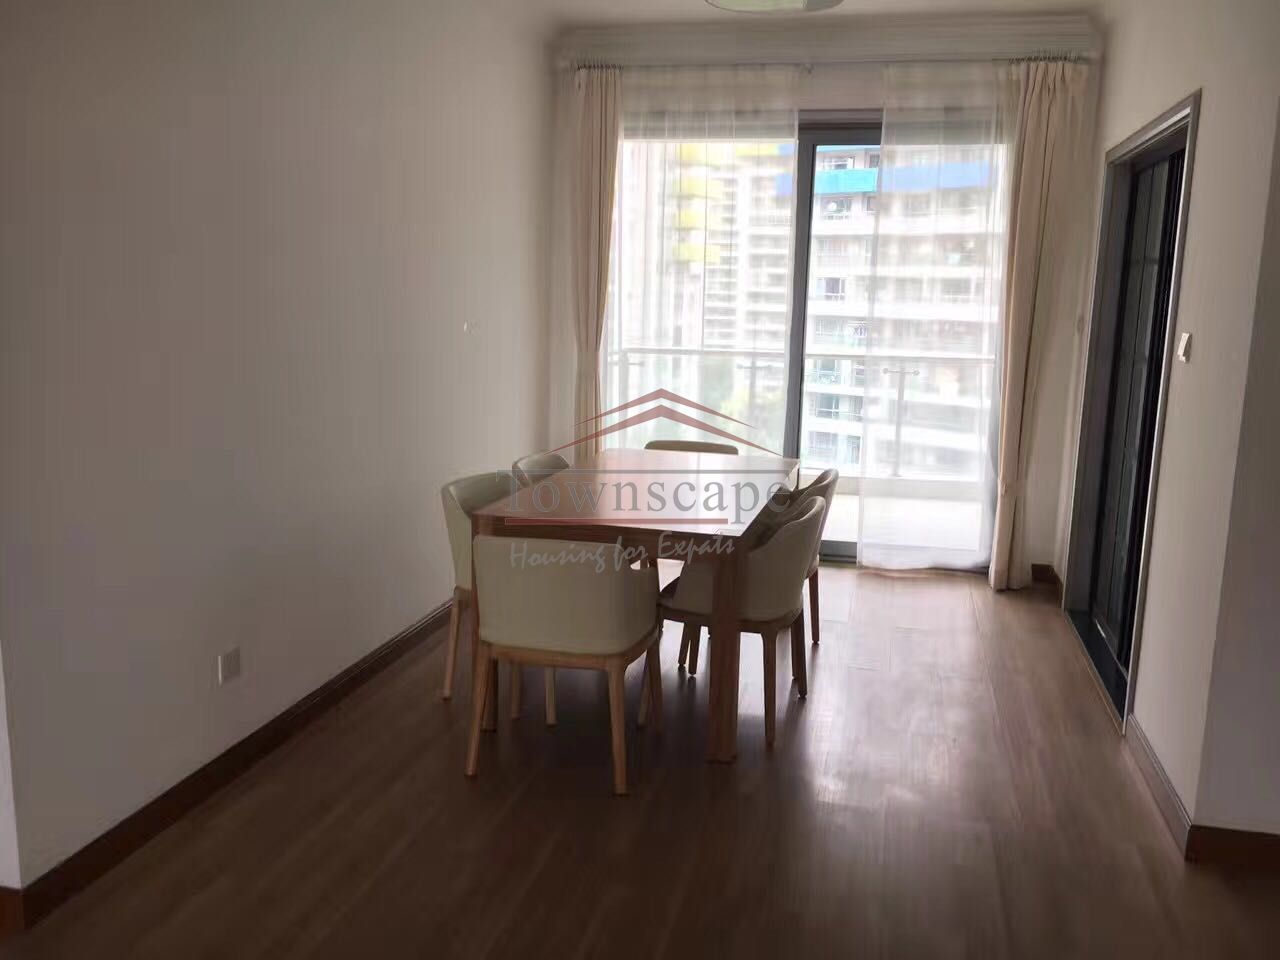  Chic 2BR Apartment beside Century Park, Pudong